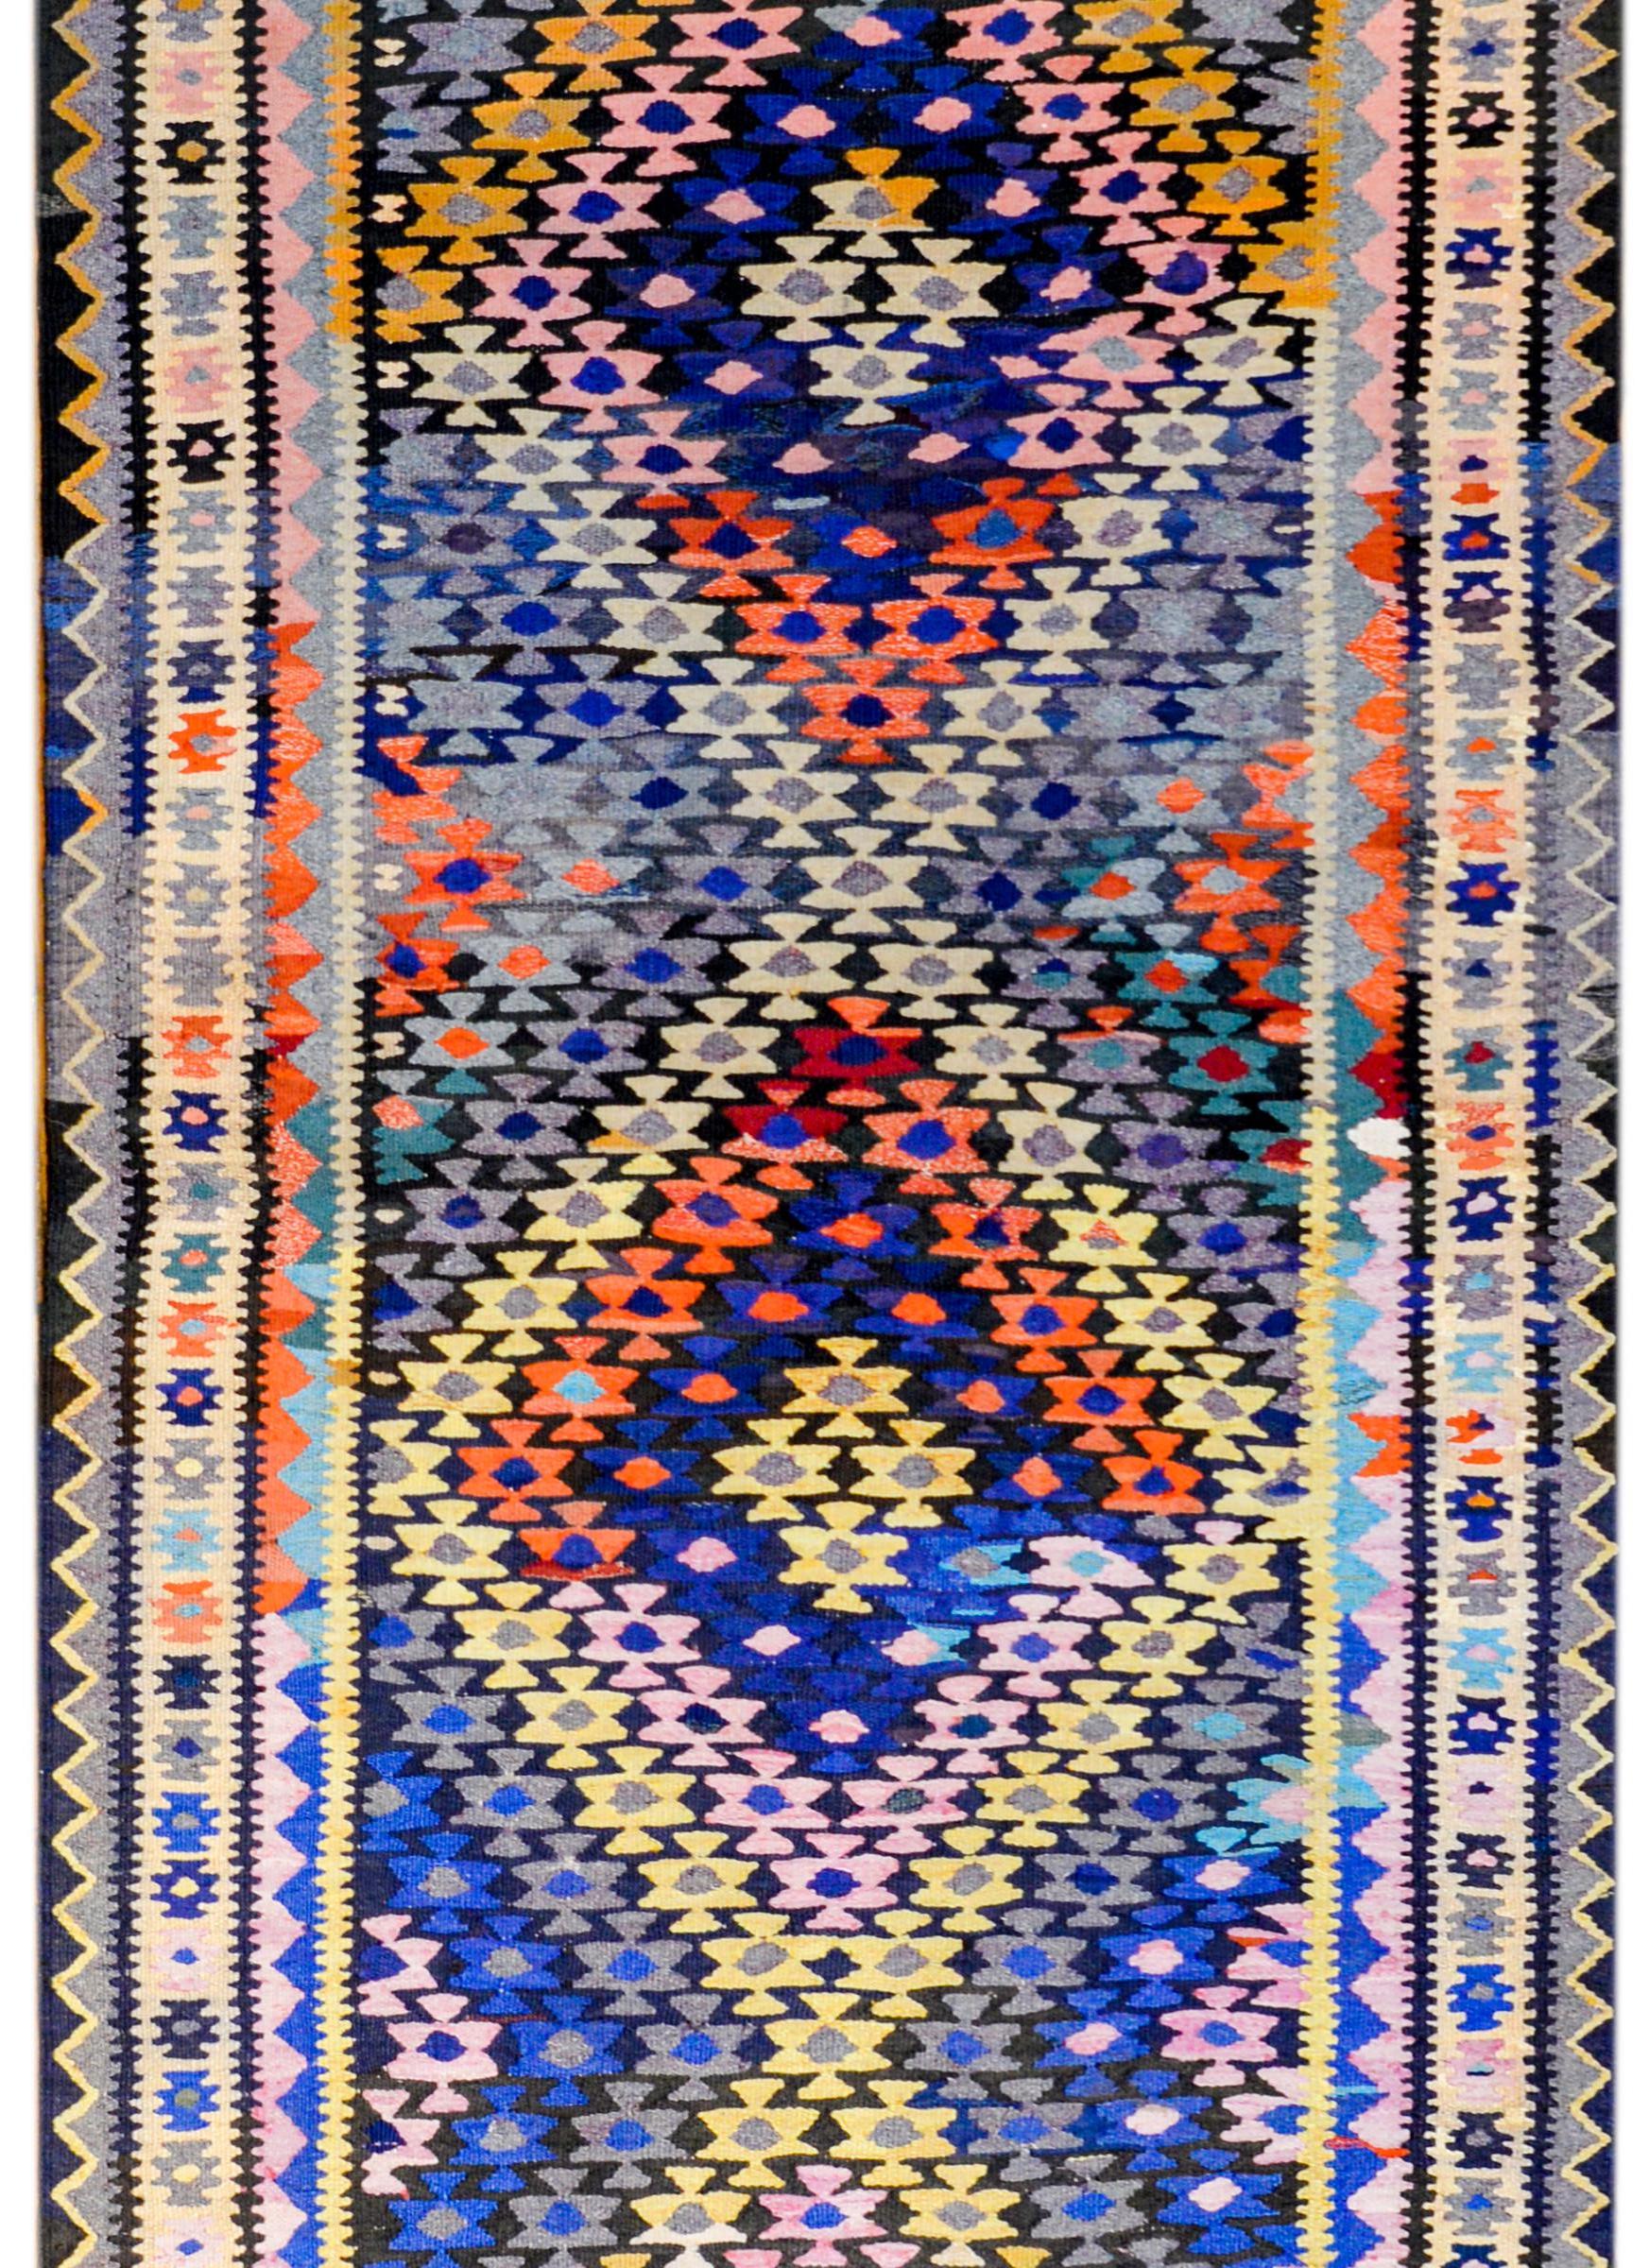 An early 20th century Persian Qazvin Kilim rug with an all-over stylized floral pattern woven in myriad colors in a way that a large-scale zigzag pattern is created across the field. The border is complementary with a central stylized floral pattern